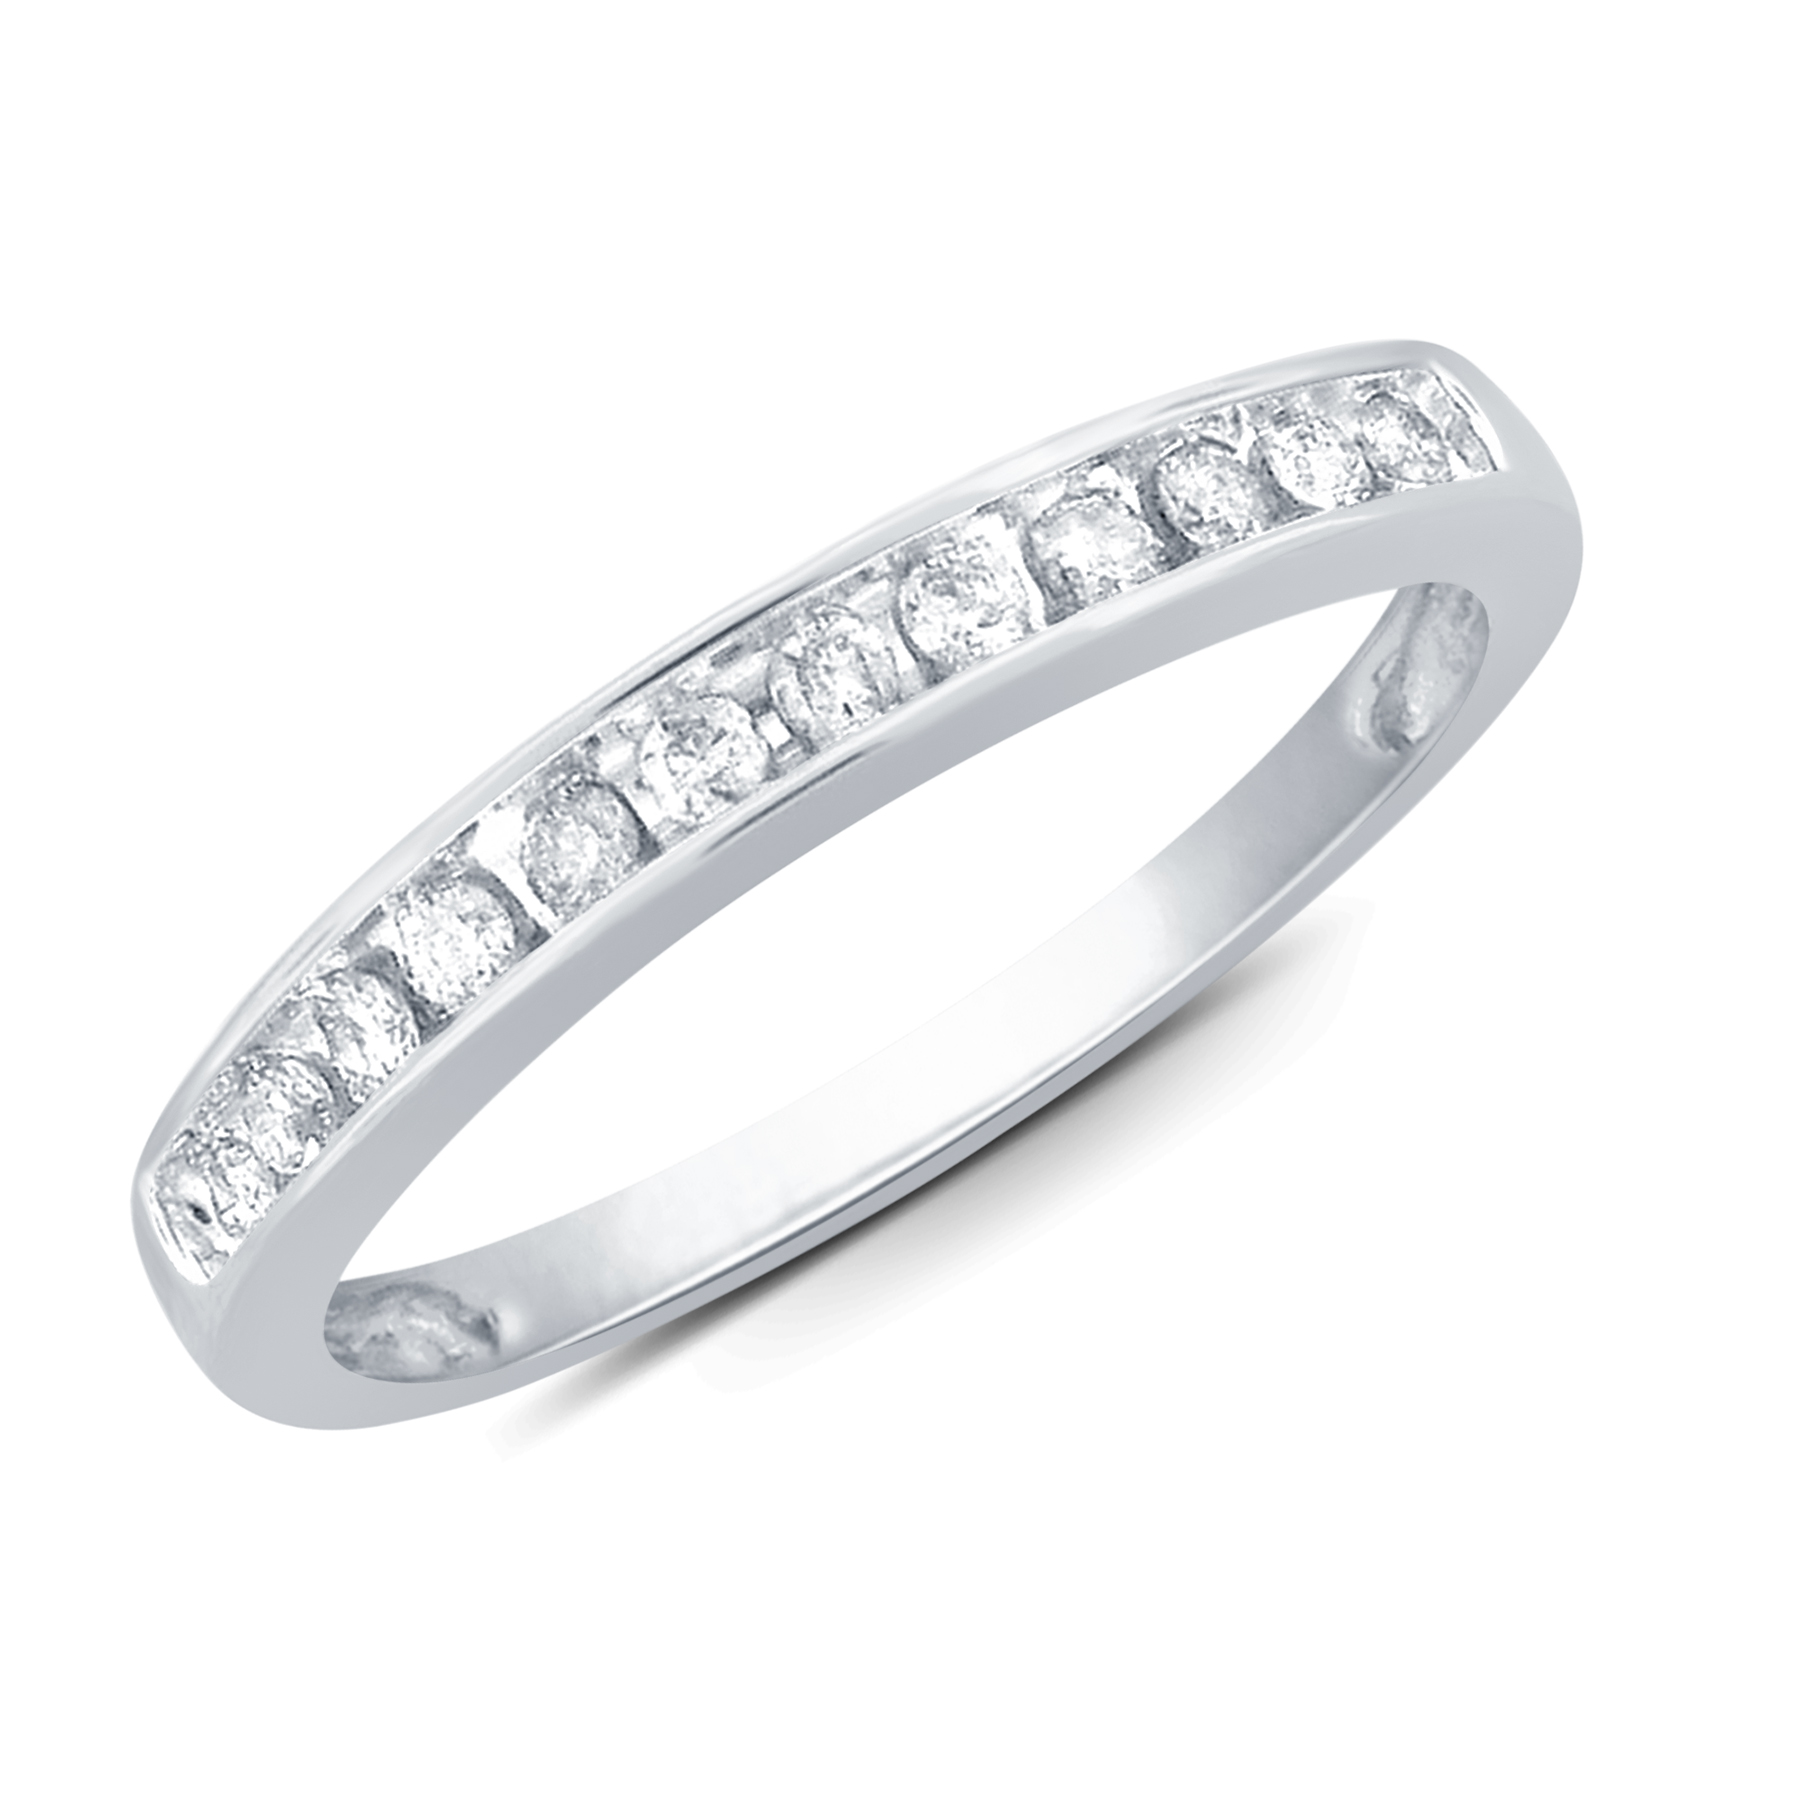 10K White Gold 1/5 CTTW Certified Diamond Channel Band Ring